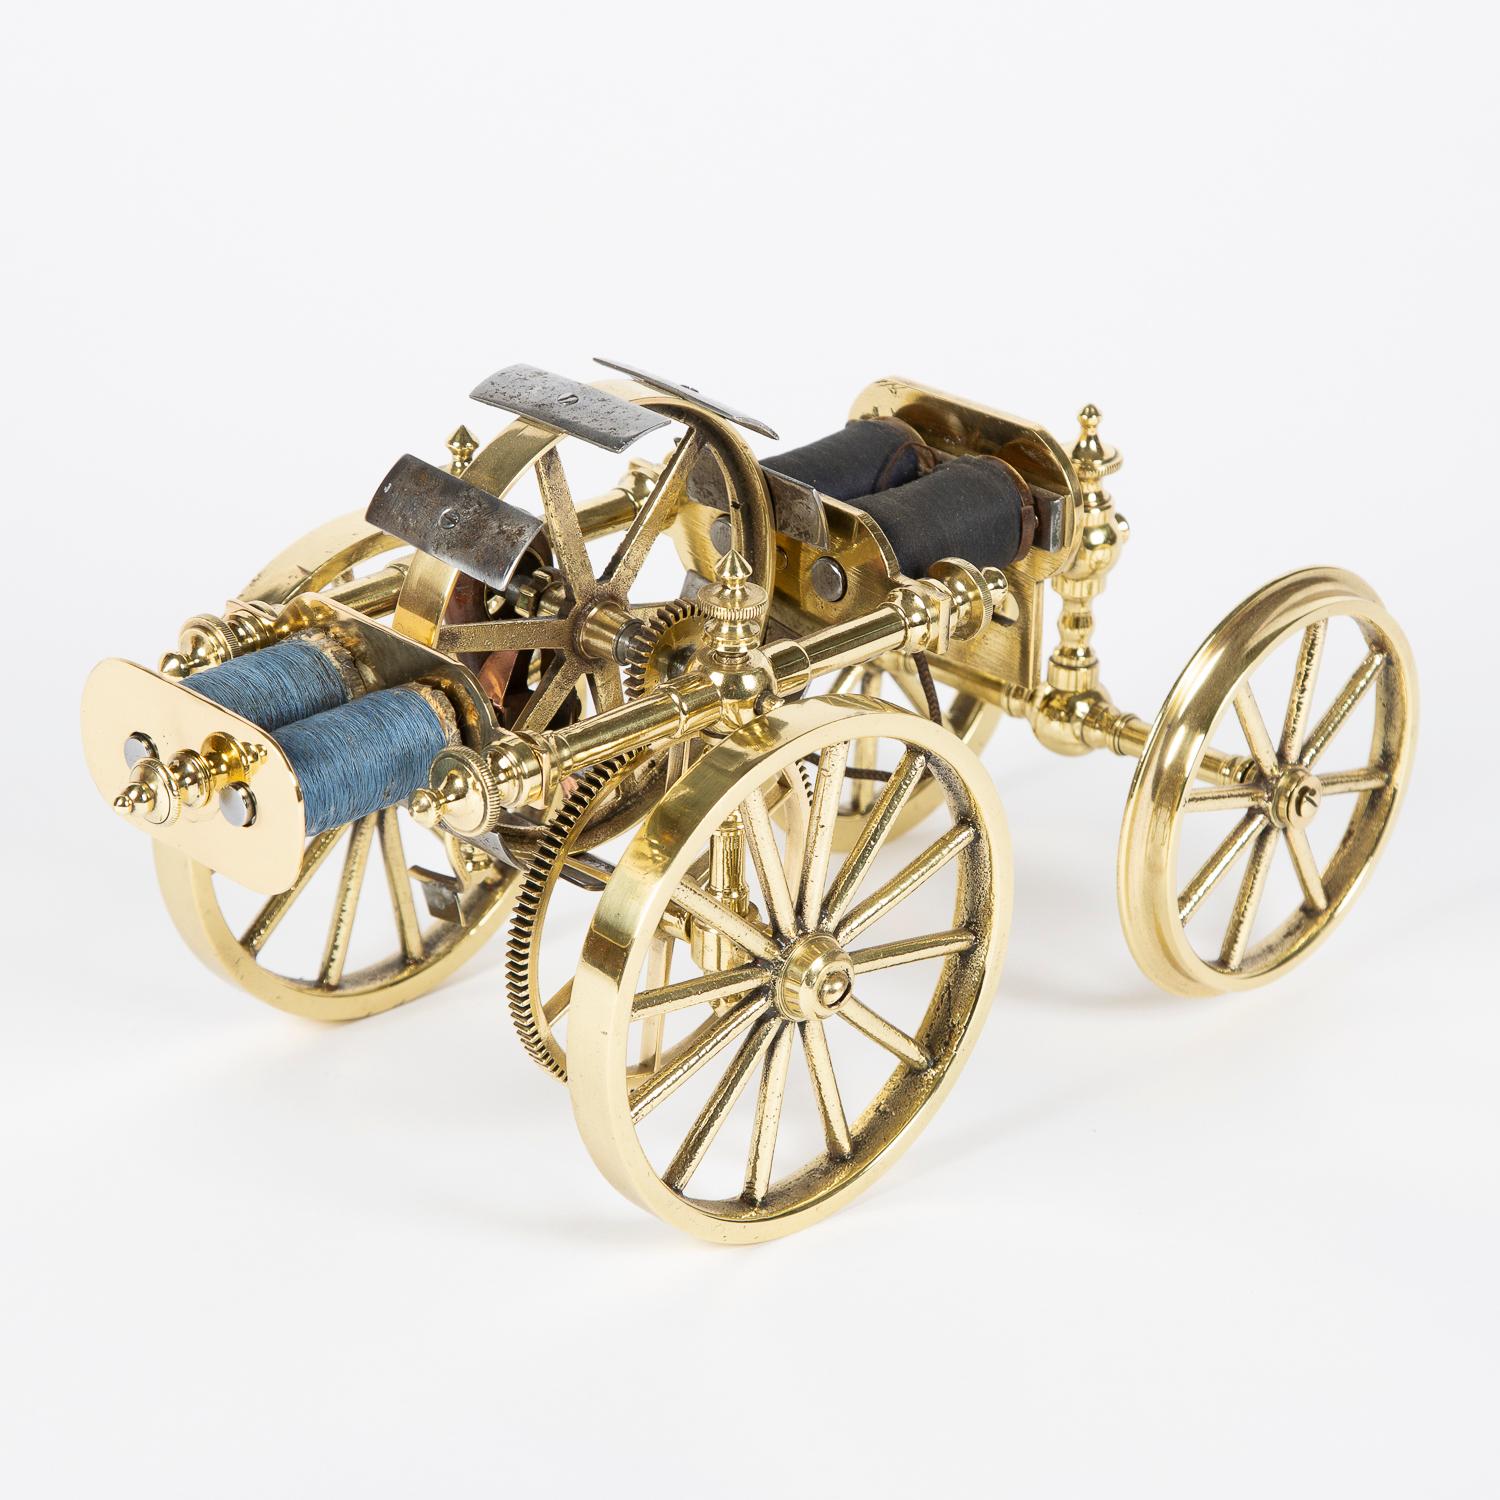 A late 19th century brass model of an electric powered road locomotive.

4 inch rear wheels with gear drive from electric motor, front 4 inch wheels with rail flange and steering.